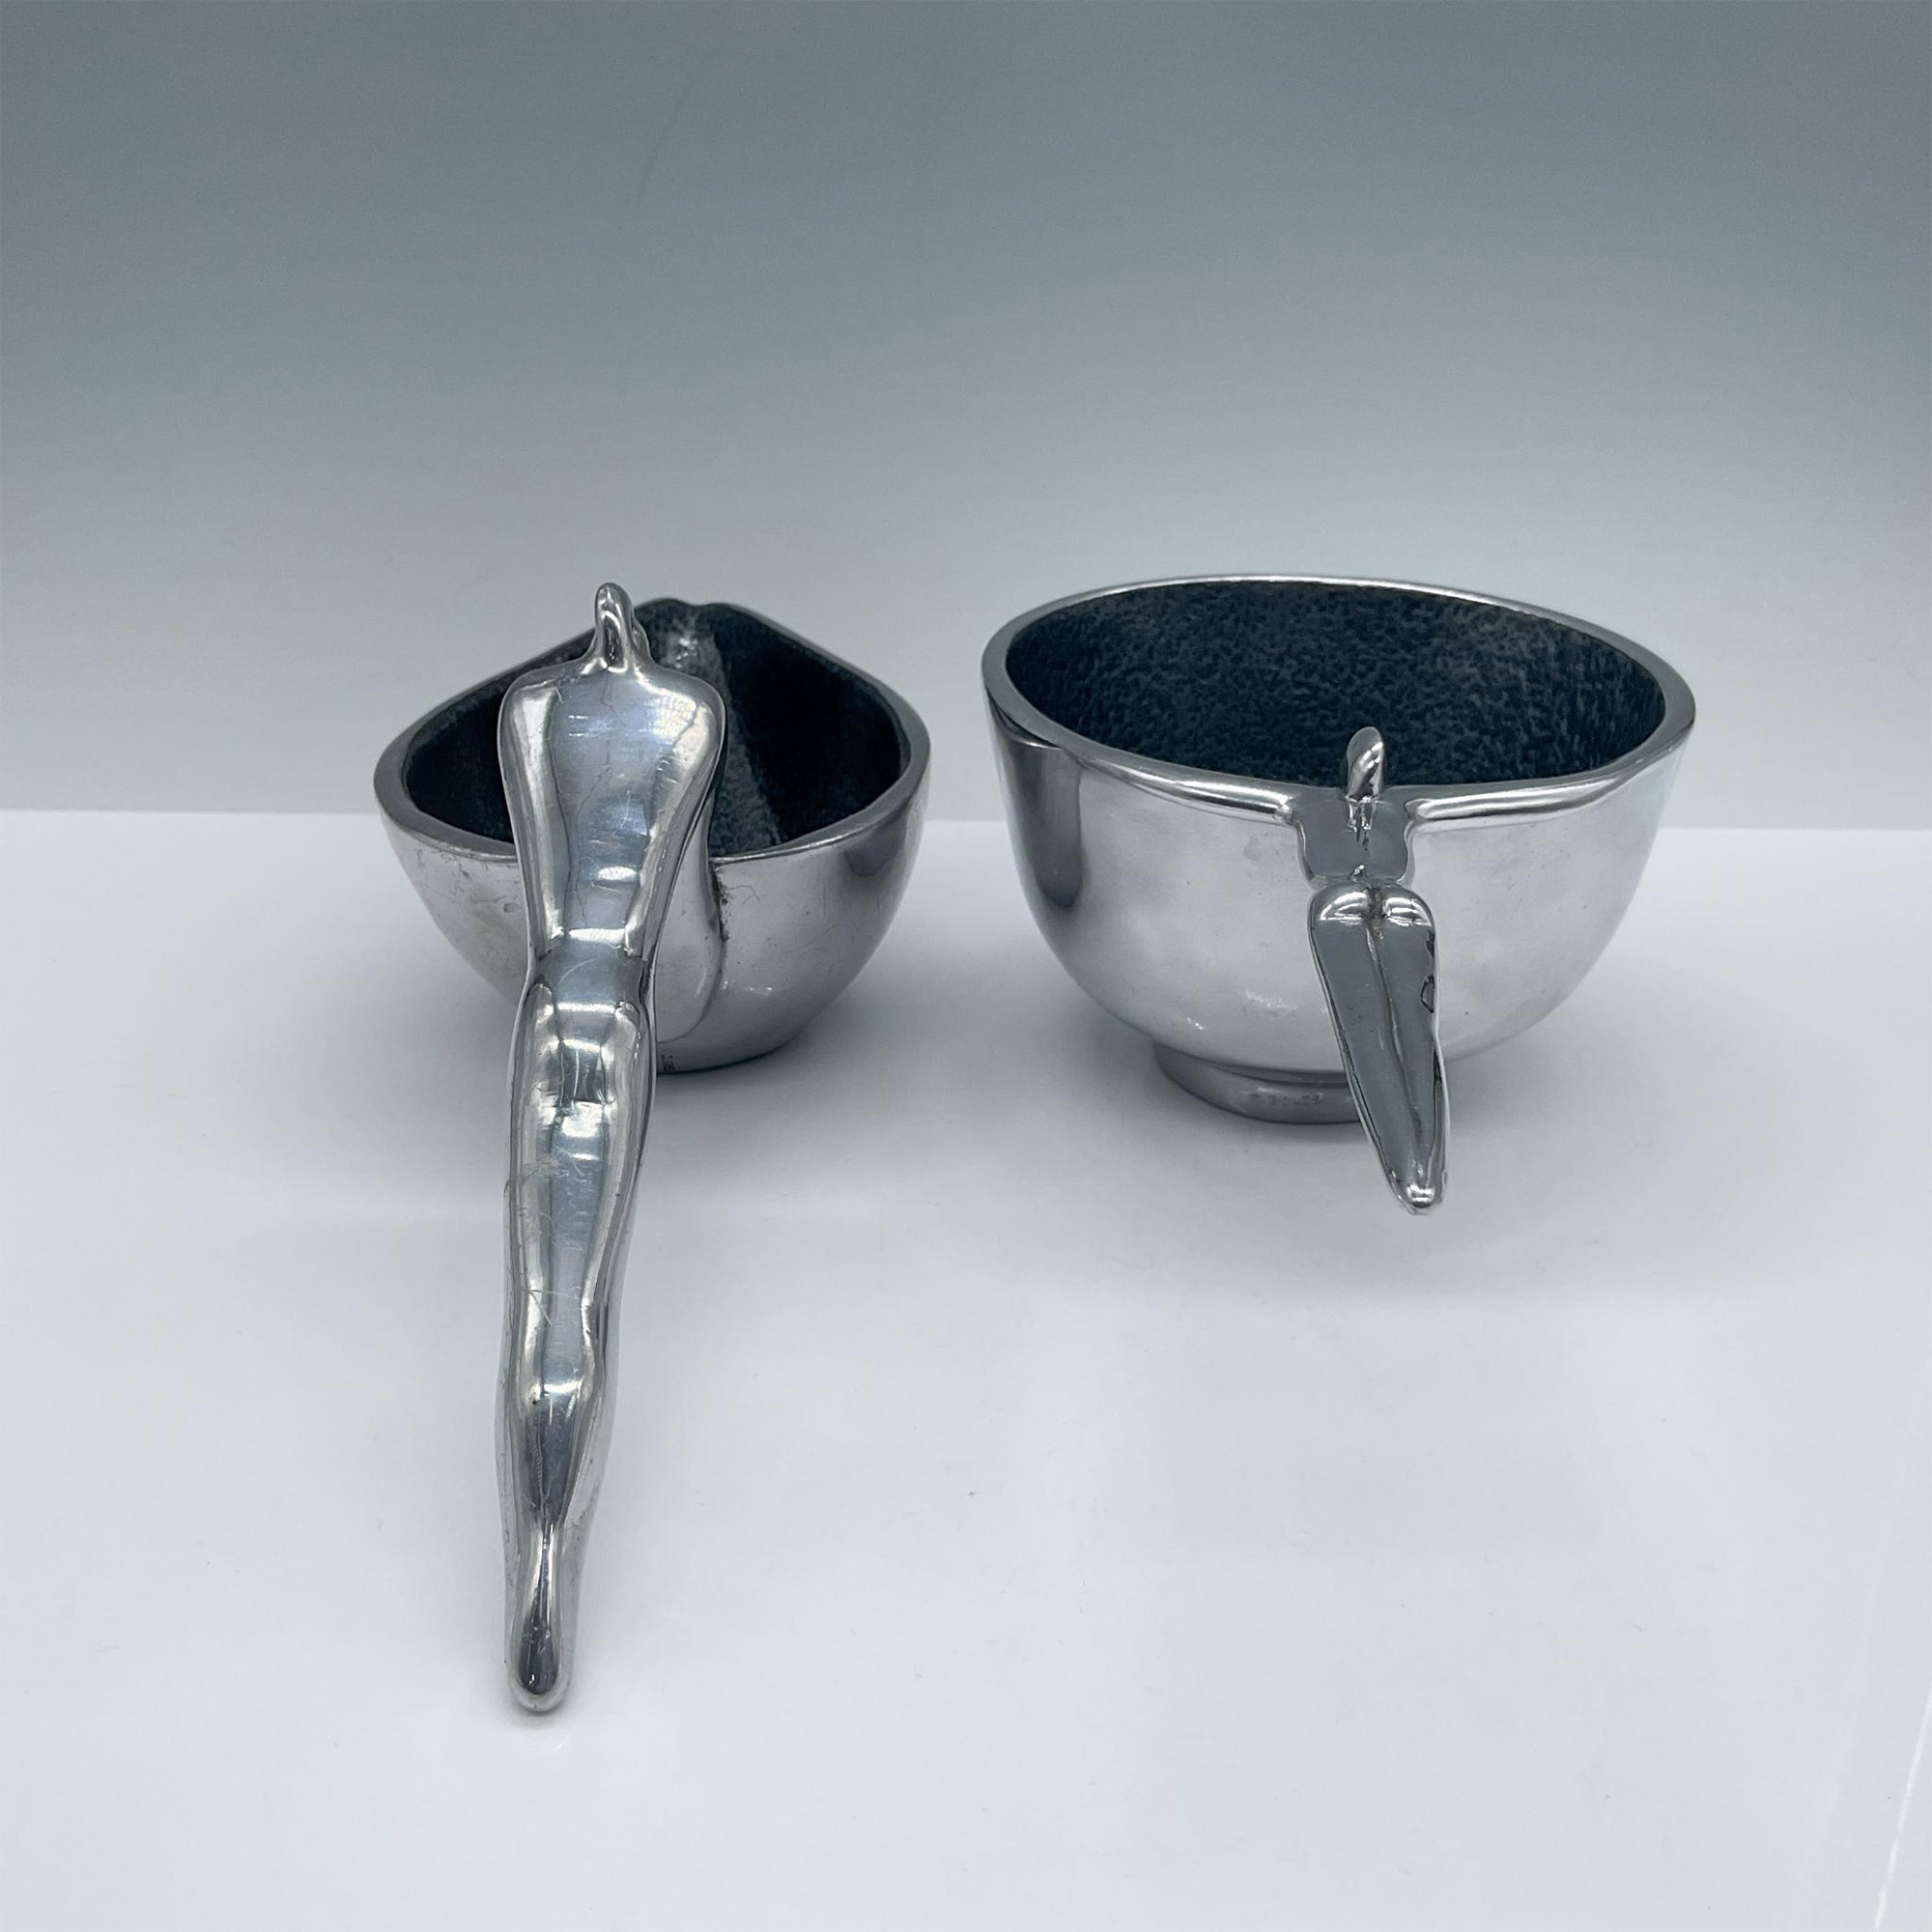 2pc Carrol Boyes Aluminum Sauce Boat and Bowl, Acrobats - Image 2 of 6